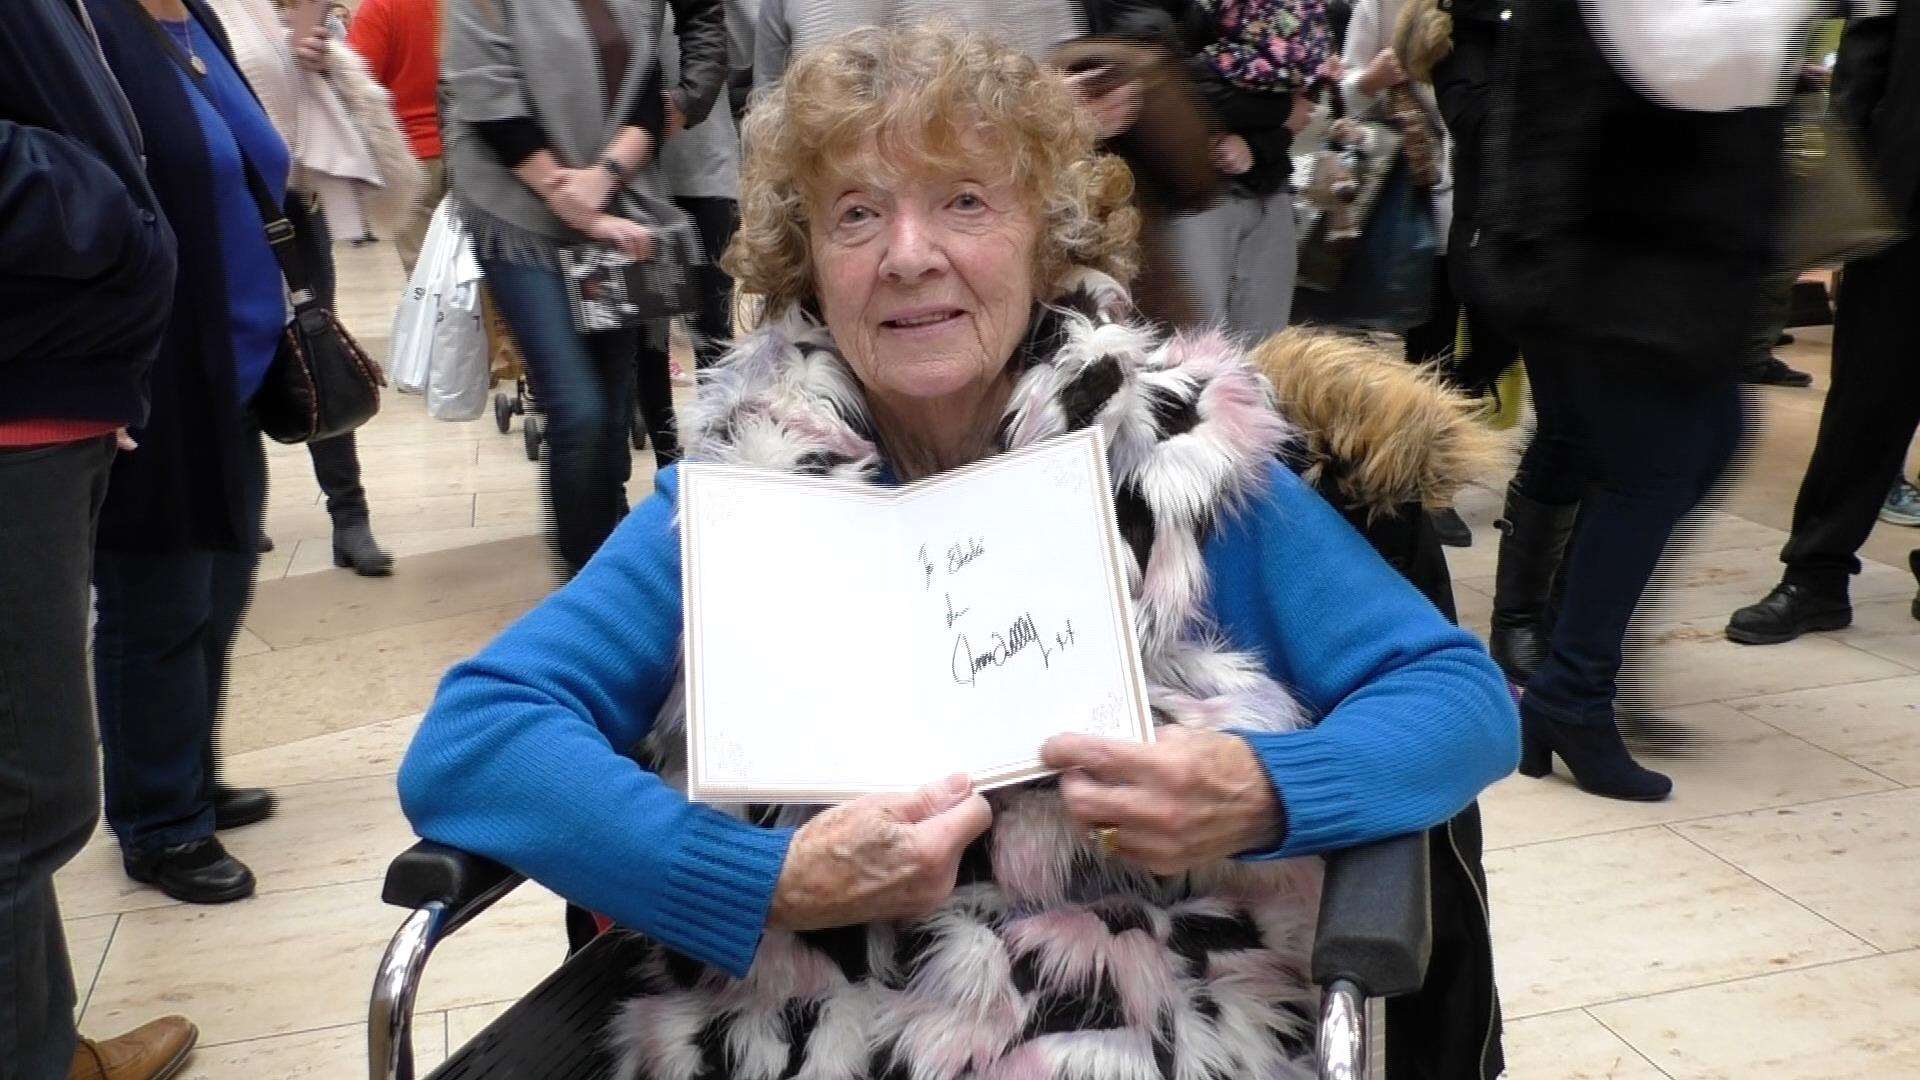 Sheila with the card signed by the snooker champion